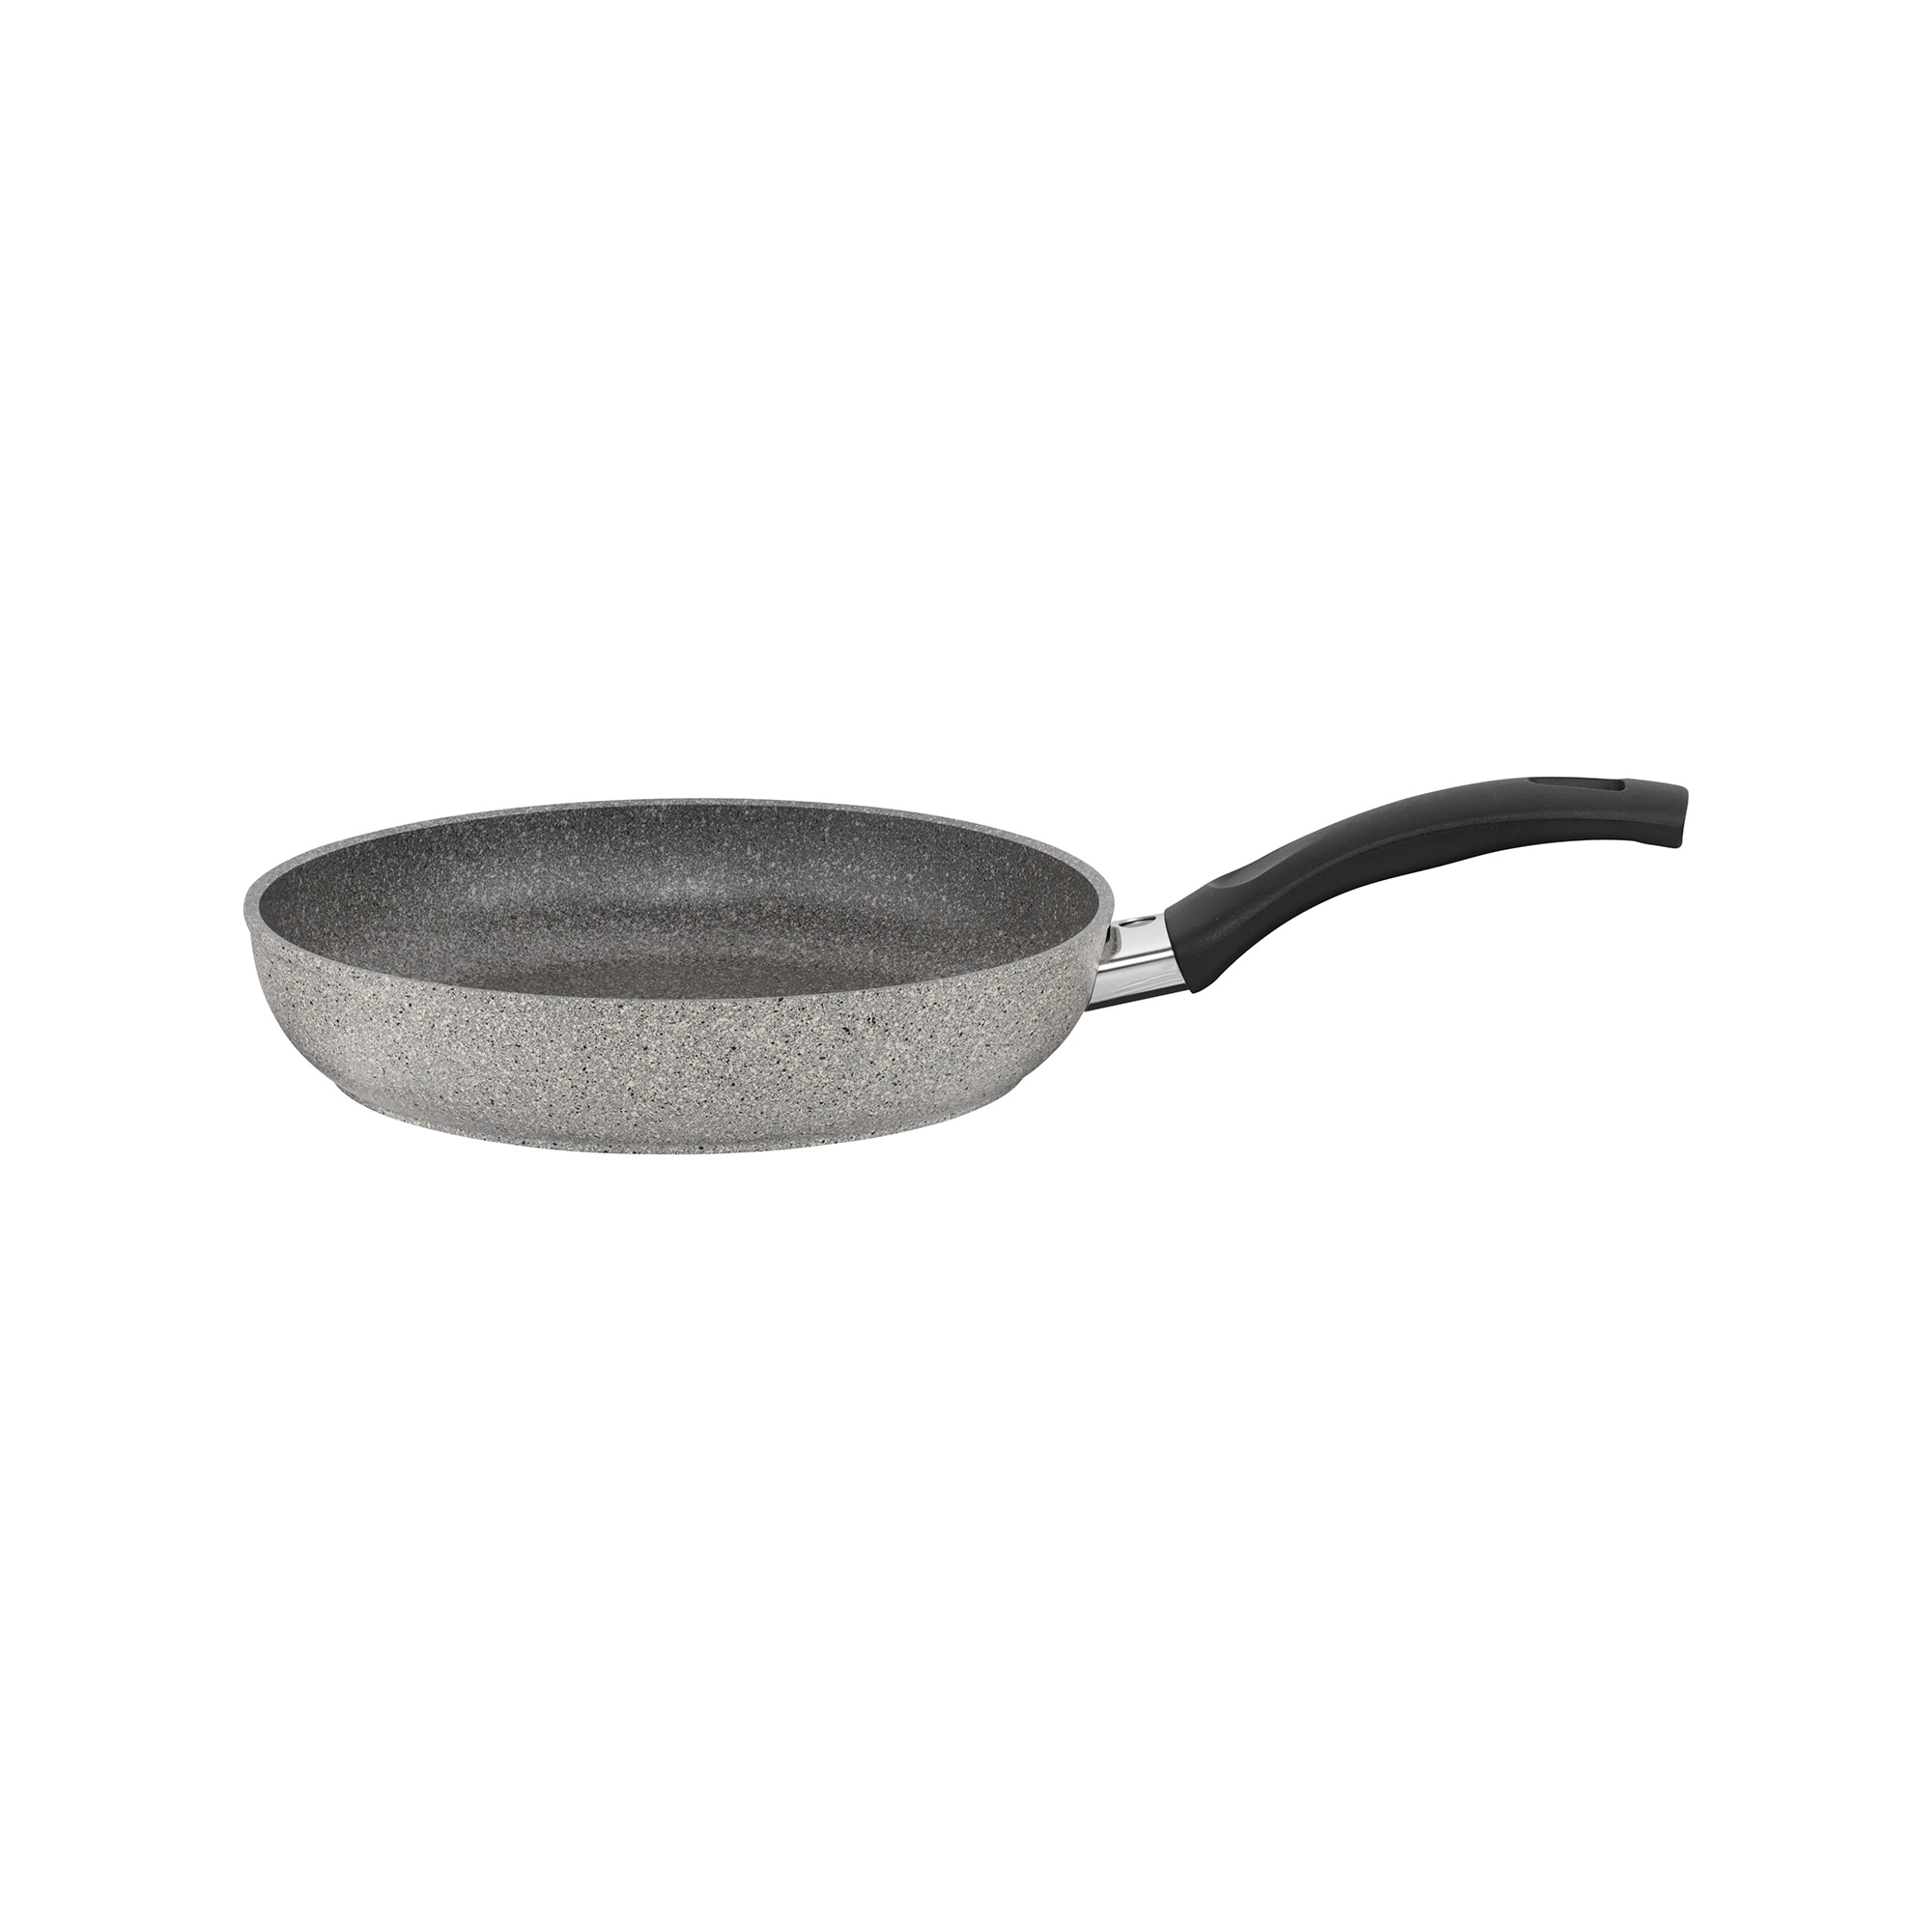 https://ak1.ostkcdn.com/images/products/is/images/direct/02e4f27d03746b50d0a5e30ed67a678c2ad72b99/Ballarini-Parma-Forged-Aluminum-Nonstick-Fry-Pan.jpg